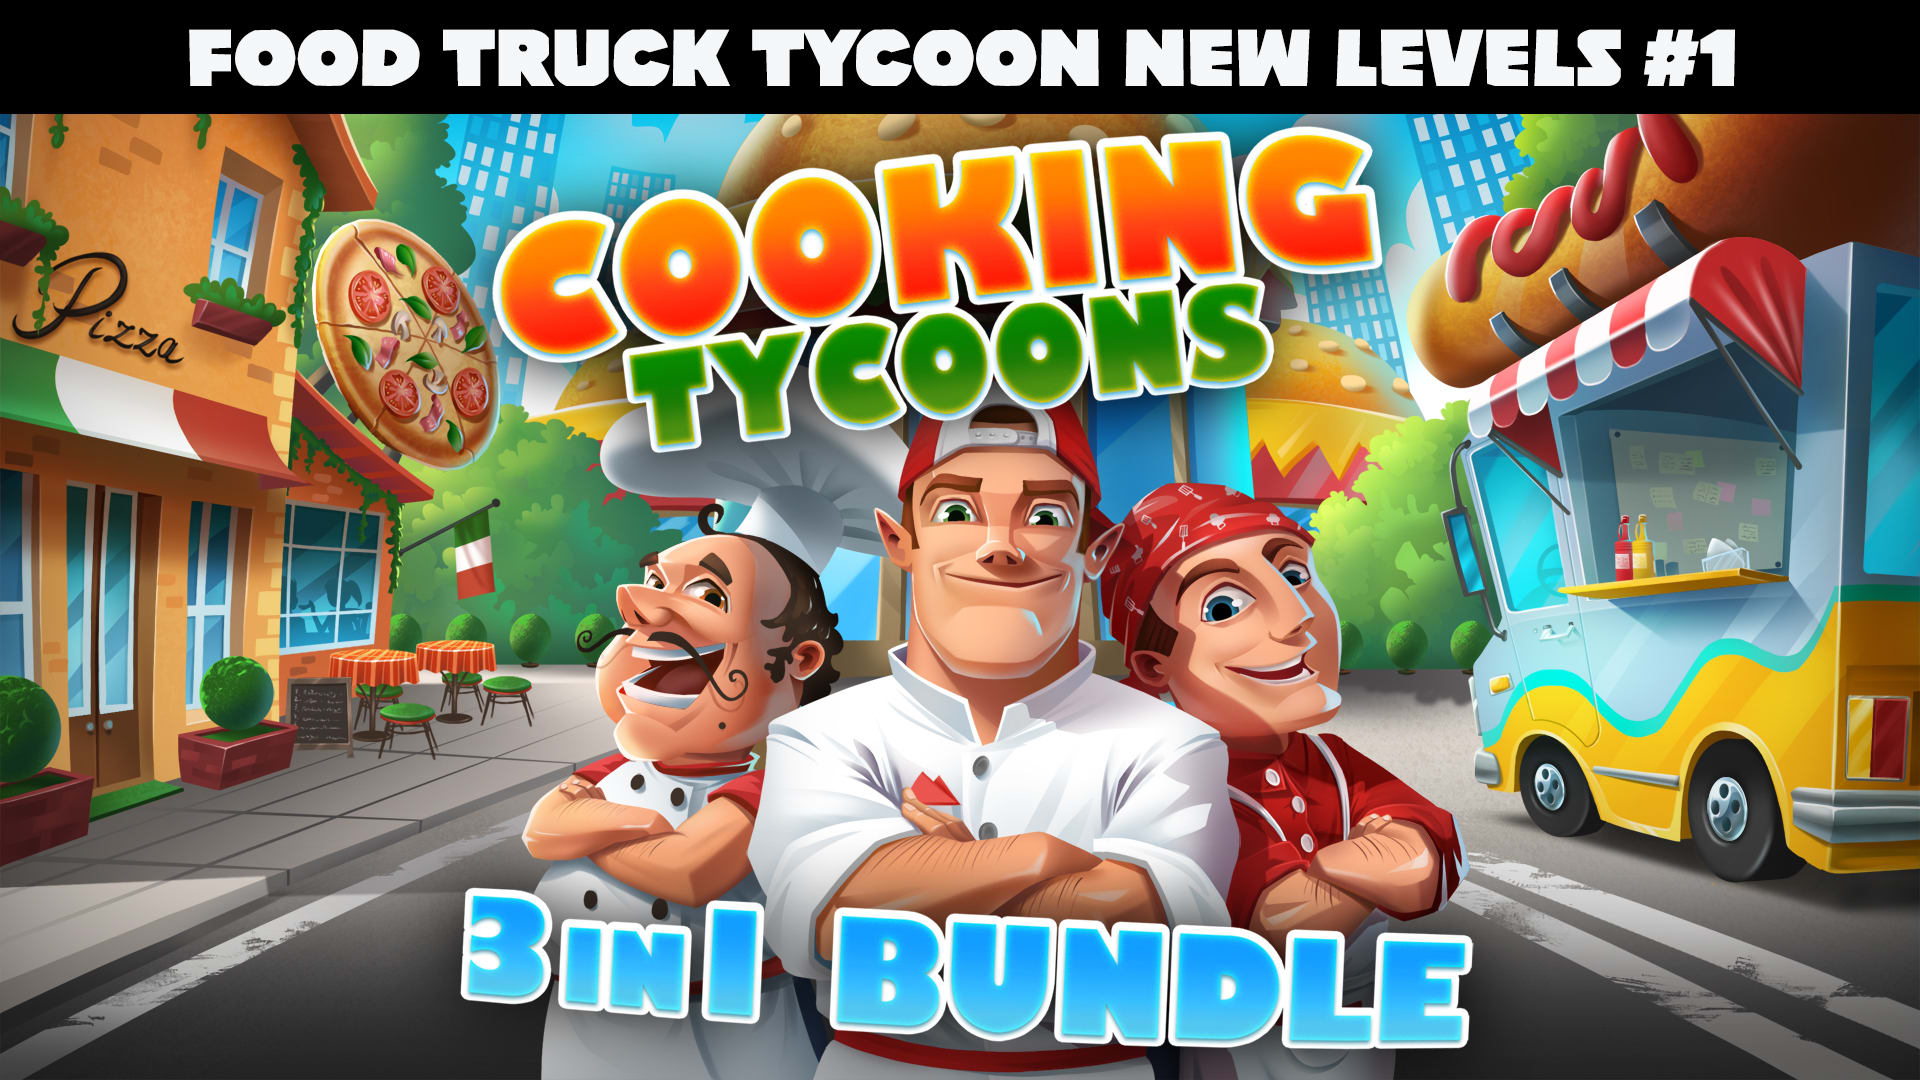 Cooking Tycoons: 3 in 1 Bundle - Food Truck Tycoon New Levels #1